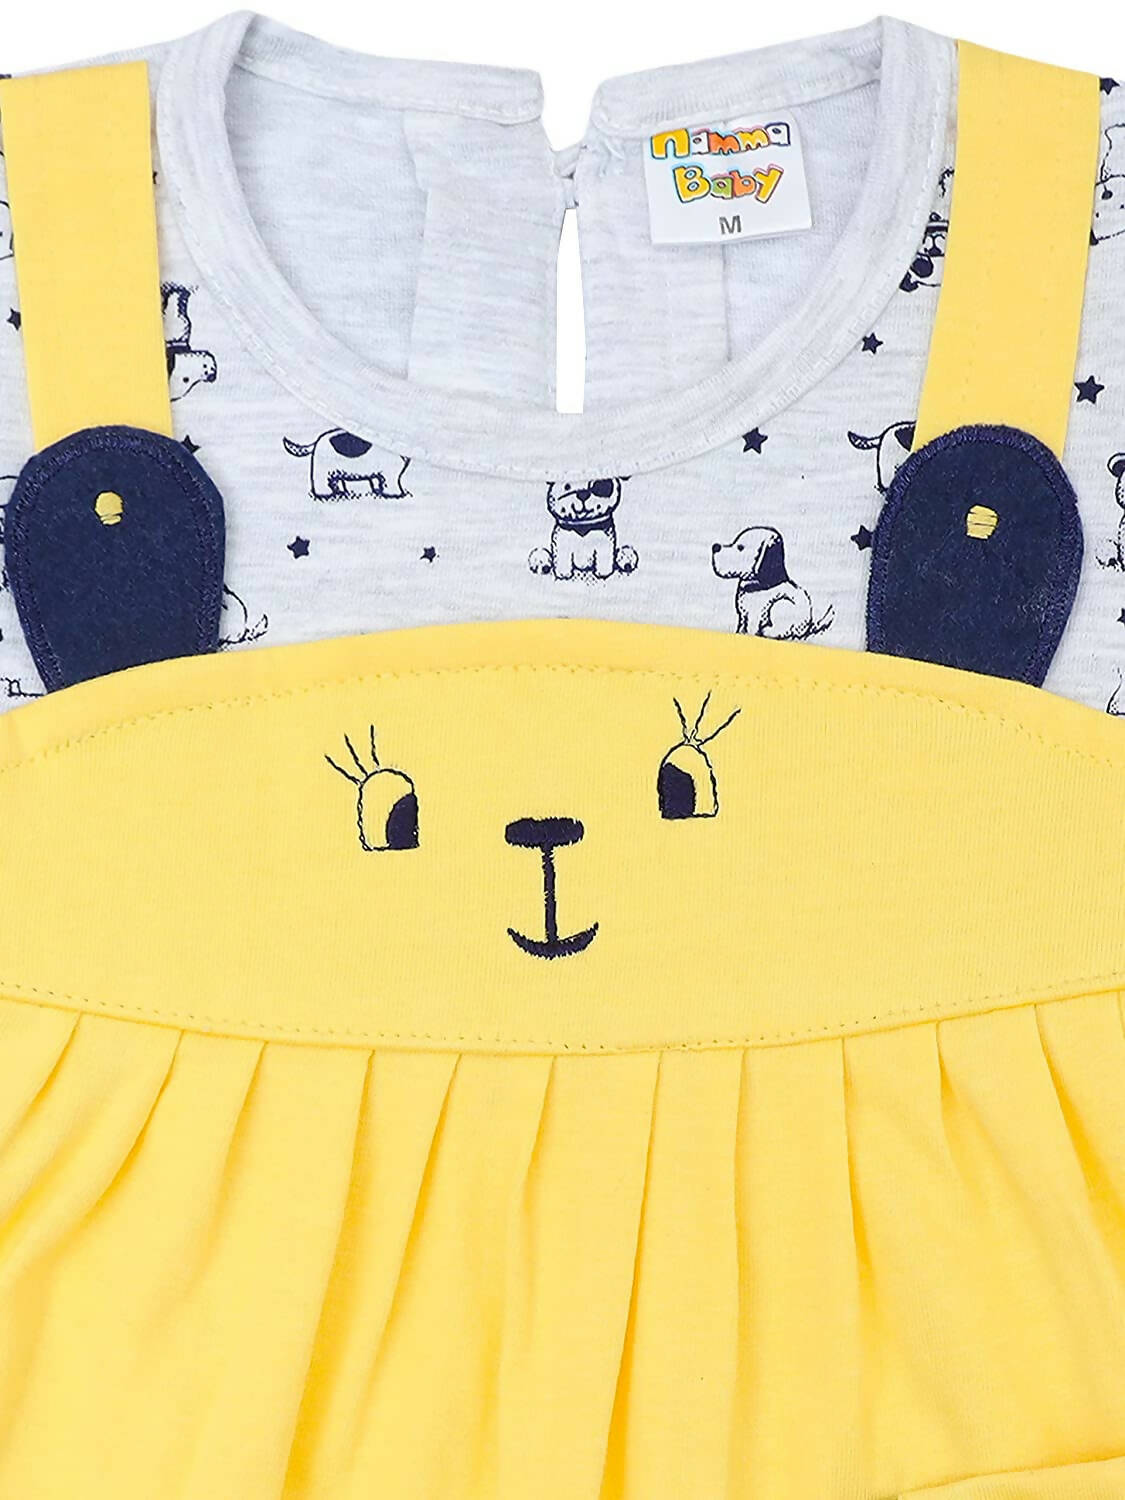 NammaBaby Baby Girl''s A-Line Mini Frock Dress - Yellow - Distacart